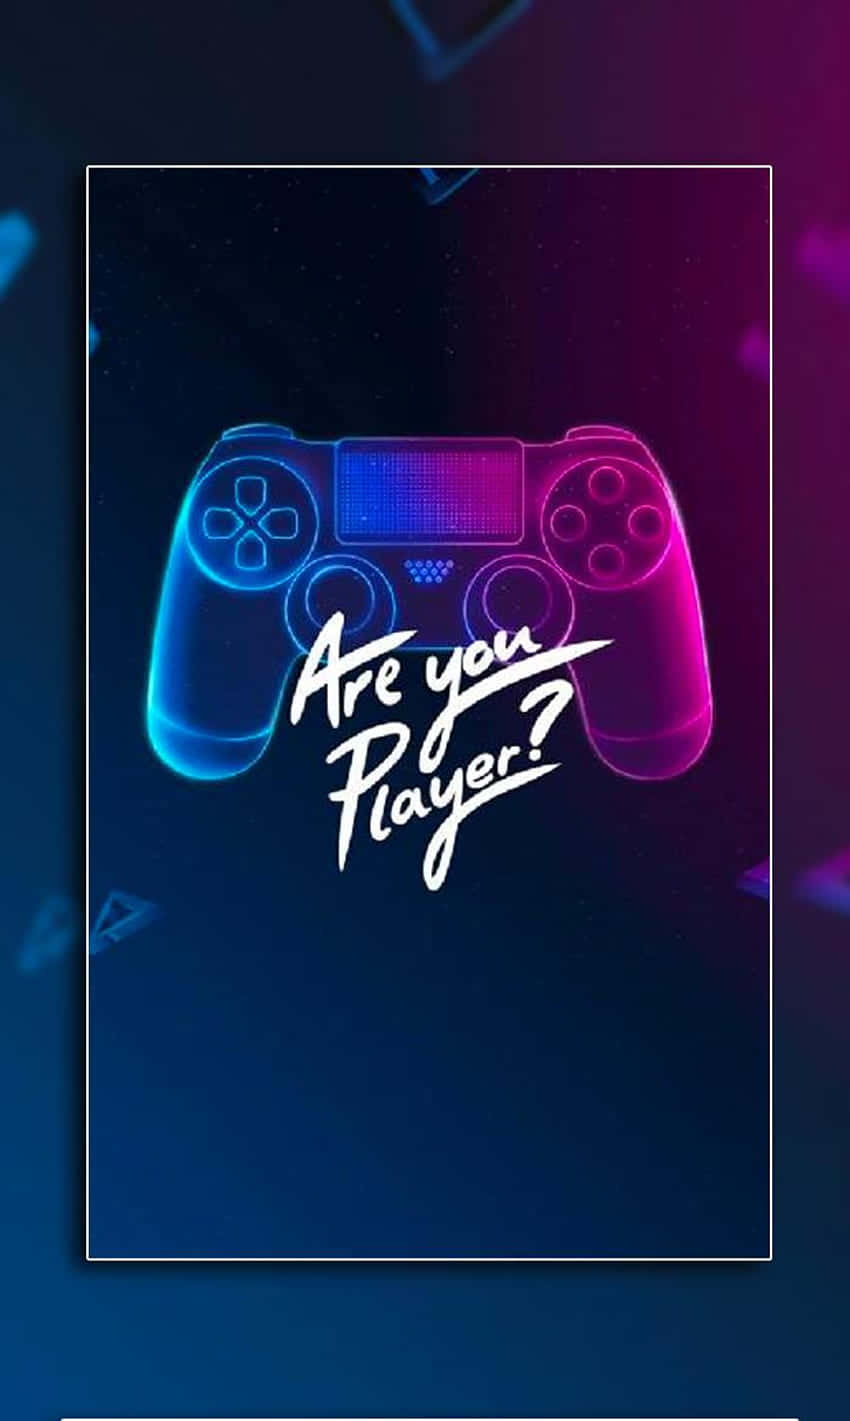 A Blue And Purple Ps4 Controller With The Words Are You A Player?